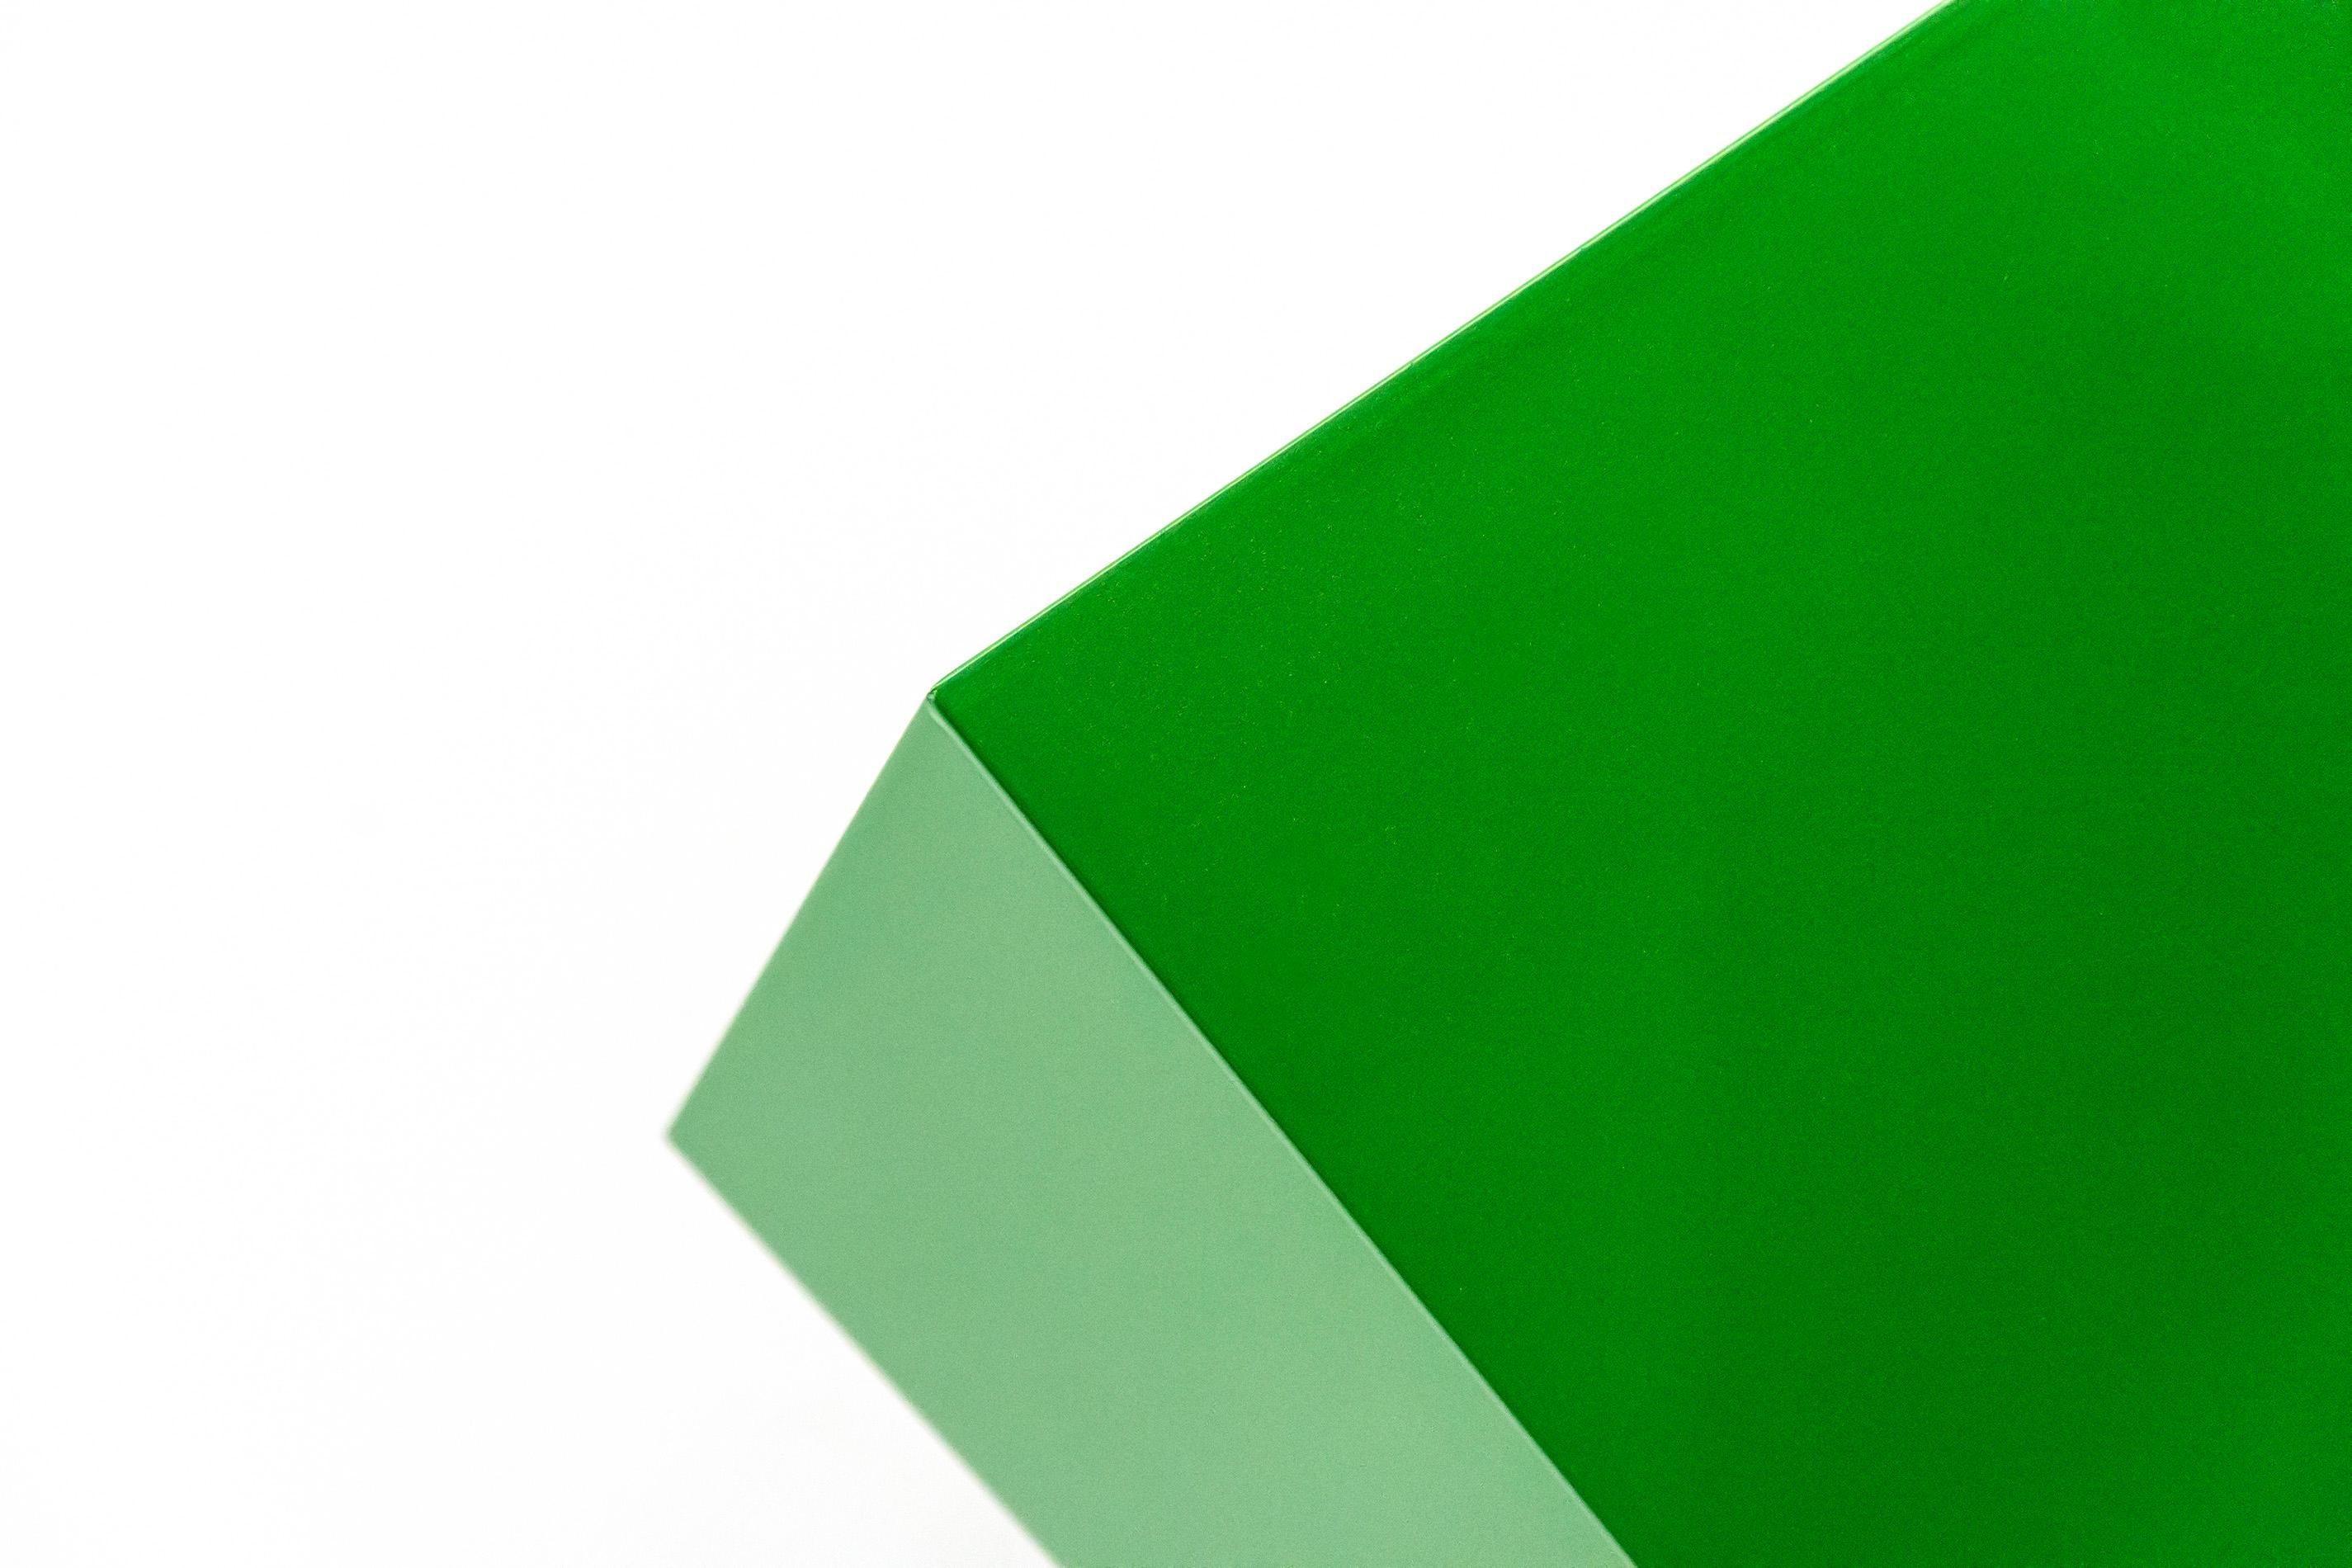 As glossy and reflective as the finish on a sleek corvette, this electric green, geometric wall sculpture by Lori Cozen-Geller is inspired by California car culture, 1960’s minimalism, and the unique musings of its creator. ‘On Point’ pays homage to